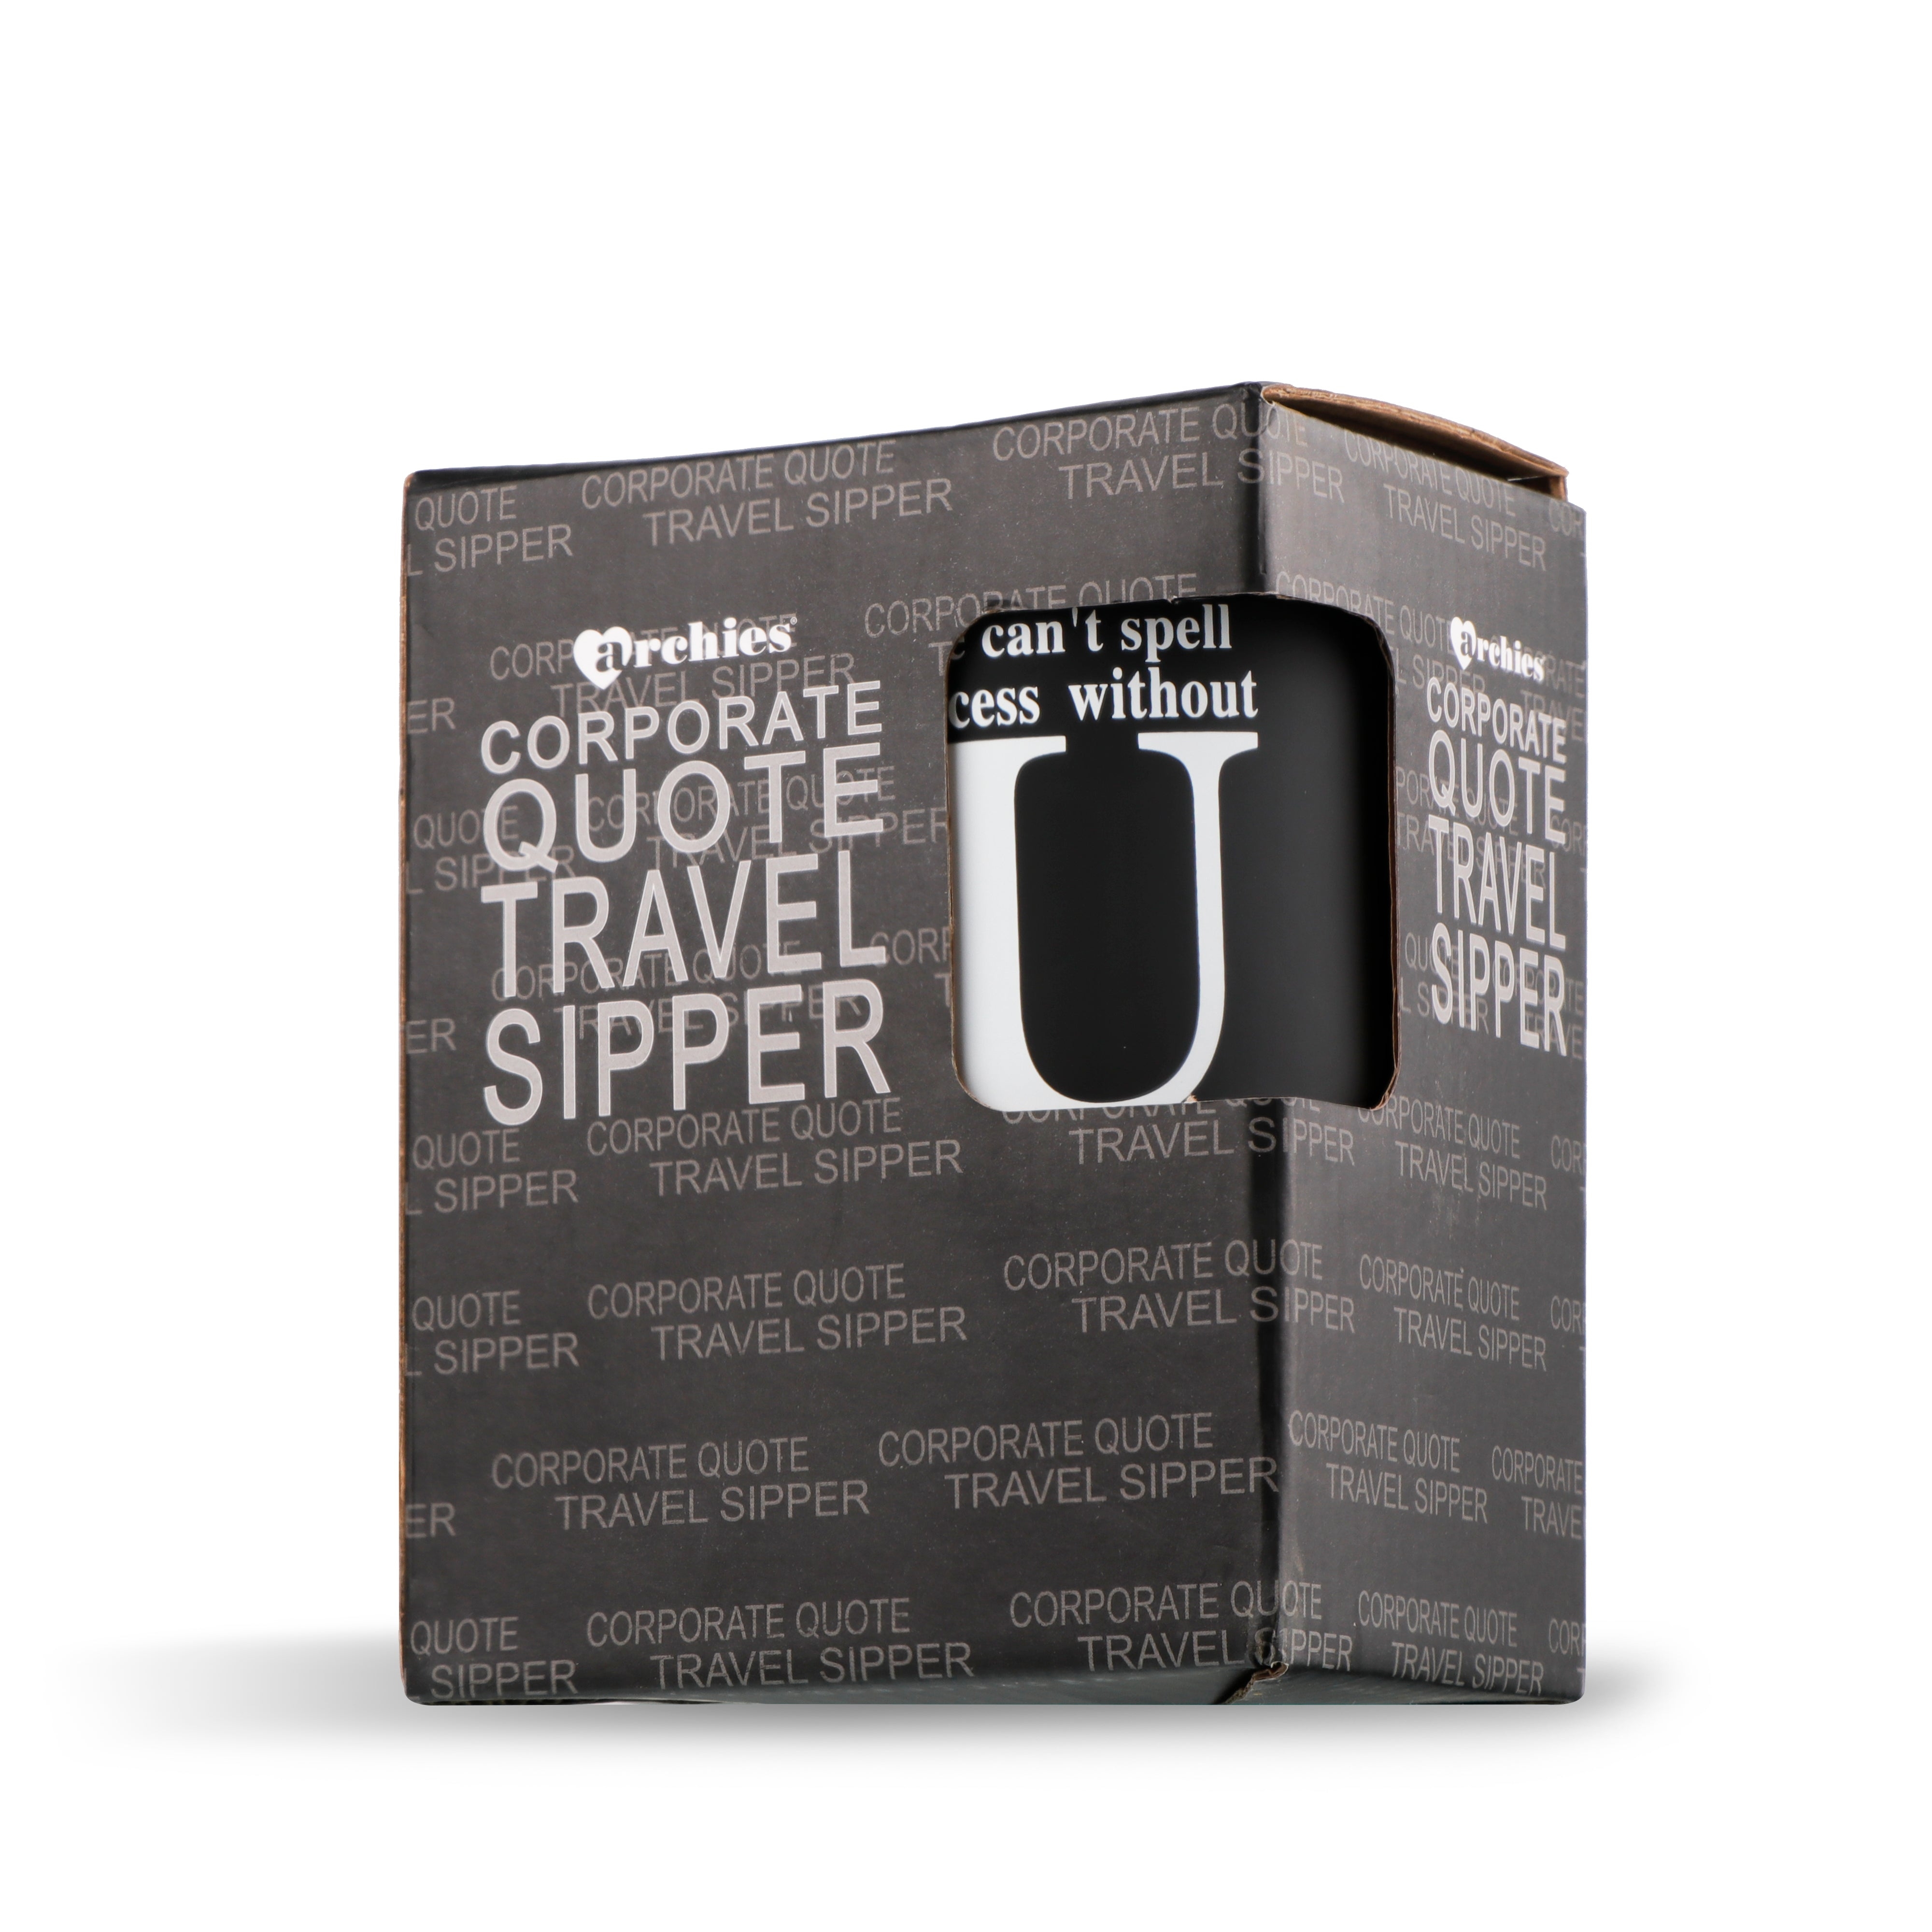 Archies | Archies Printed Hard PrasticTravel Sipper & Notebook combo with Corporate Quote Theme 3